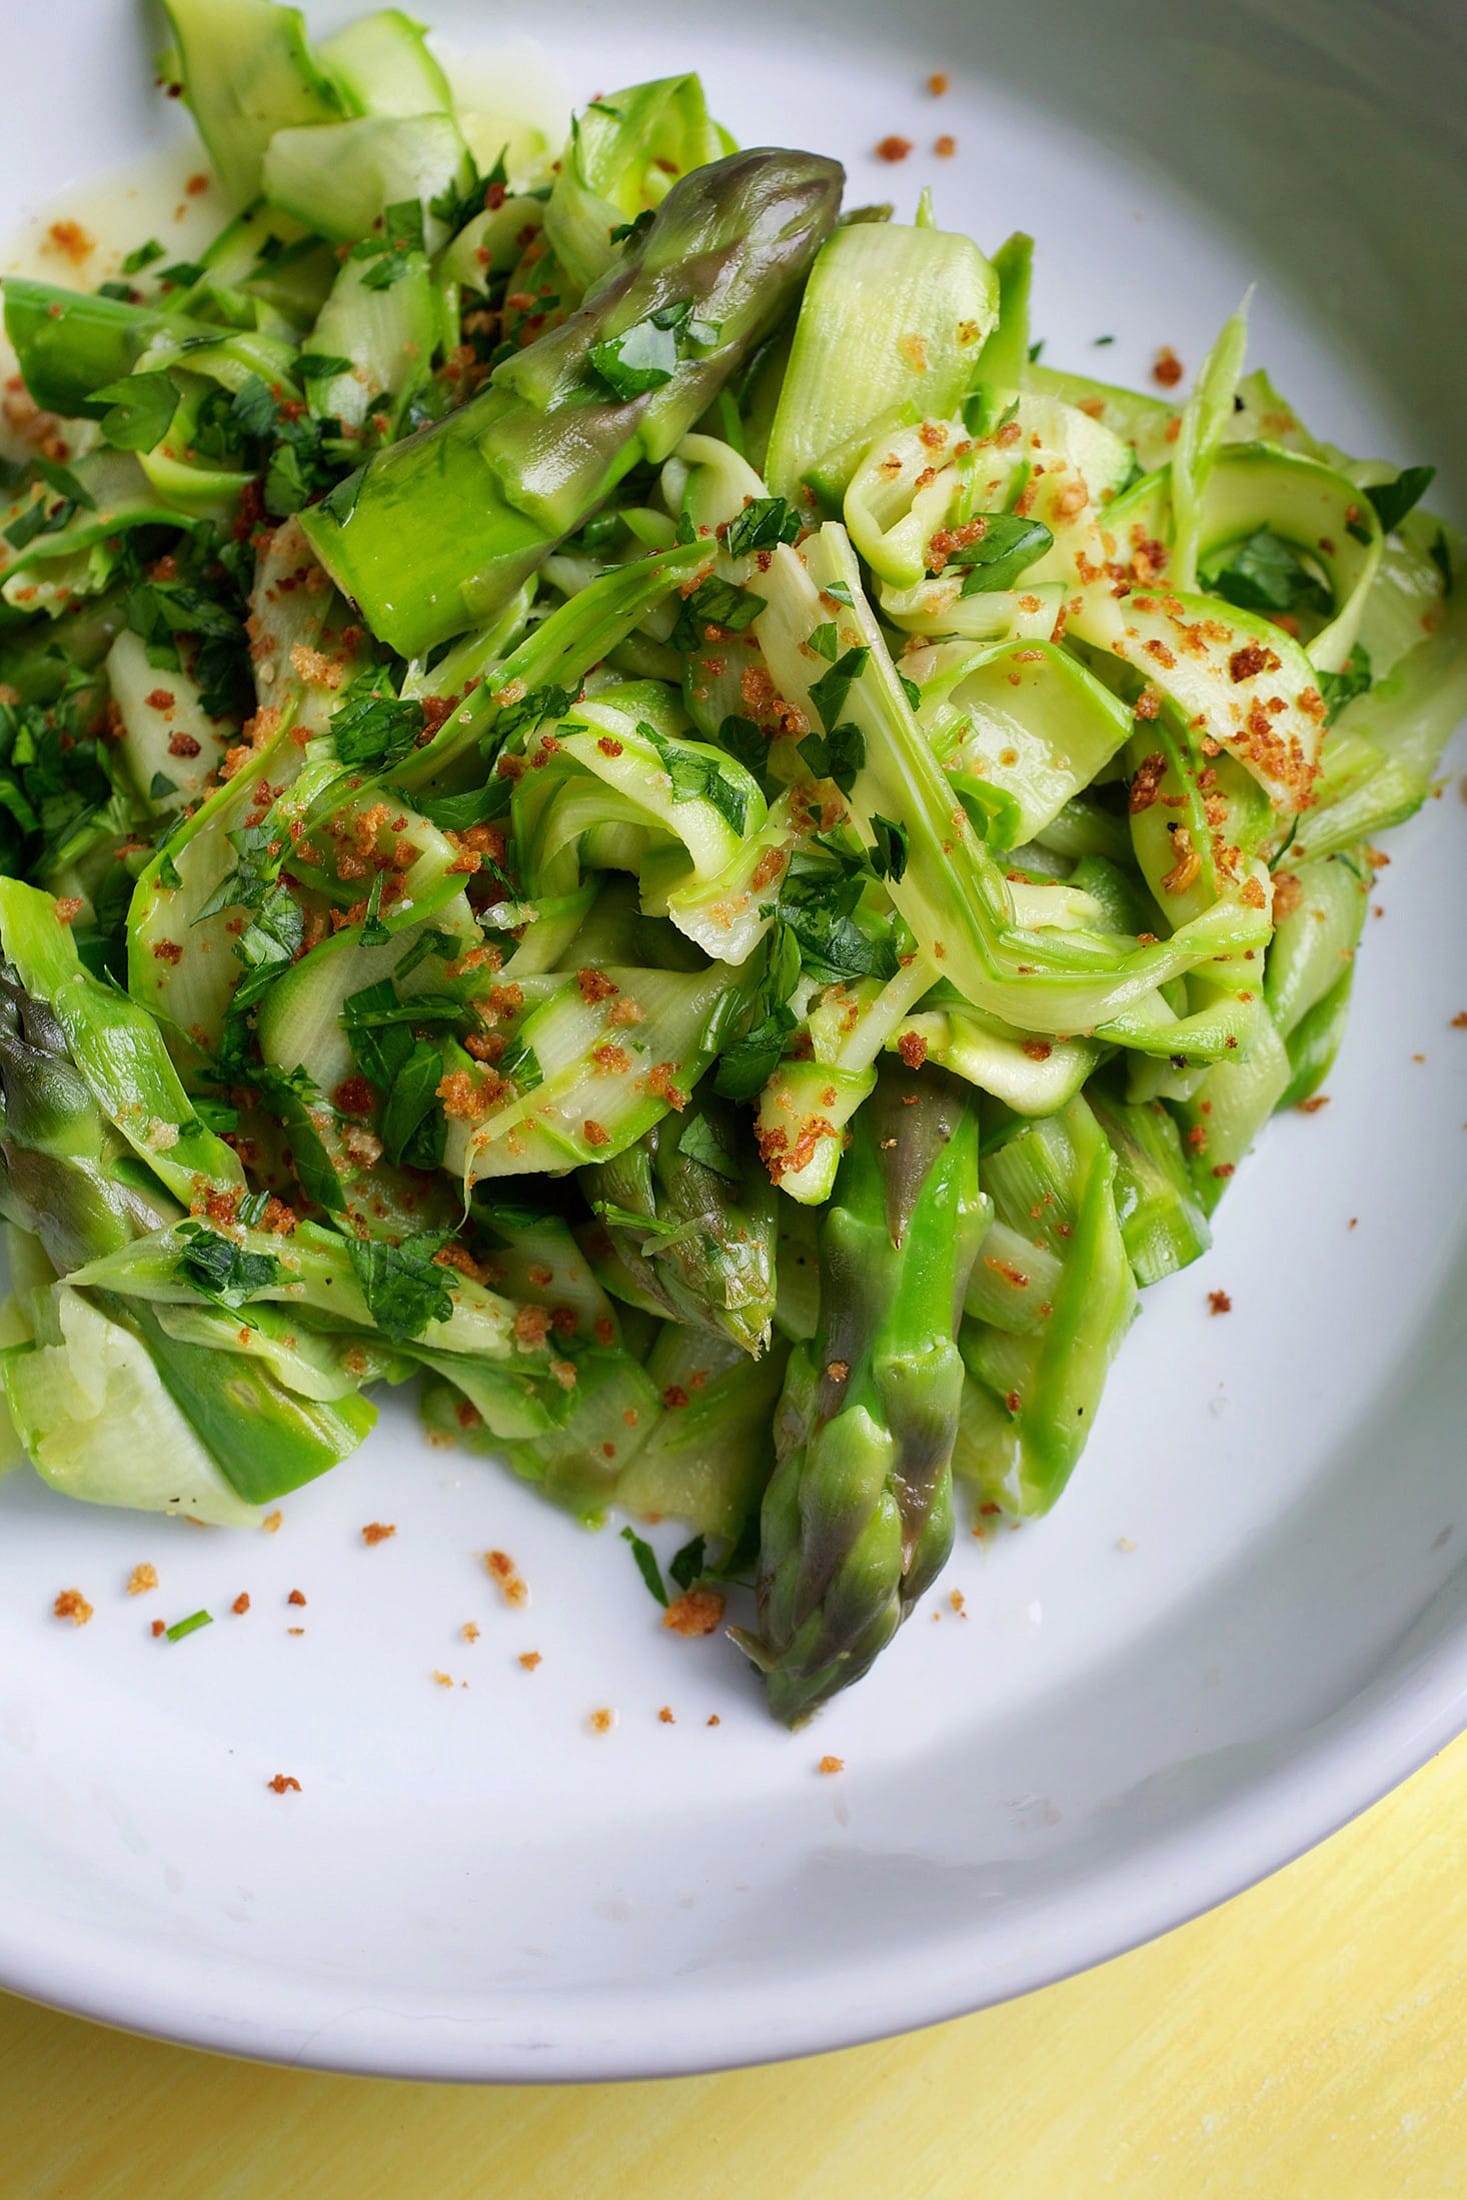 To shake up the vegetable routine, try Asparagus Pasta With Garlicky Bread Crumbs.